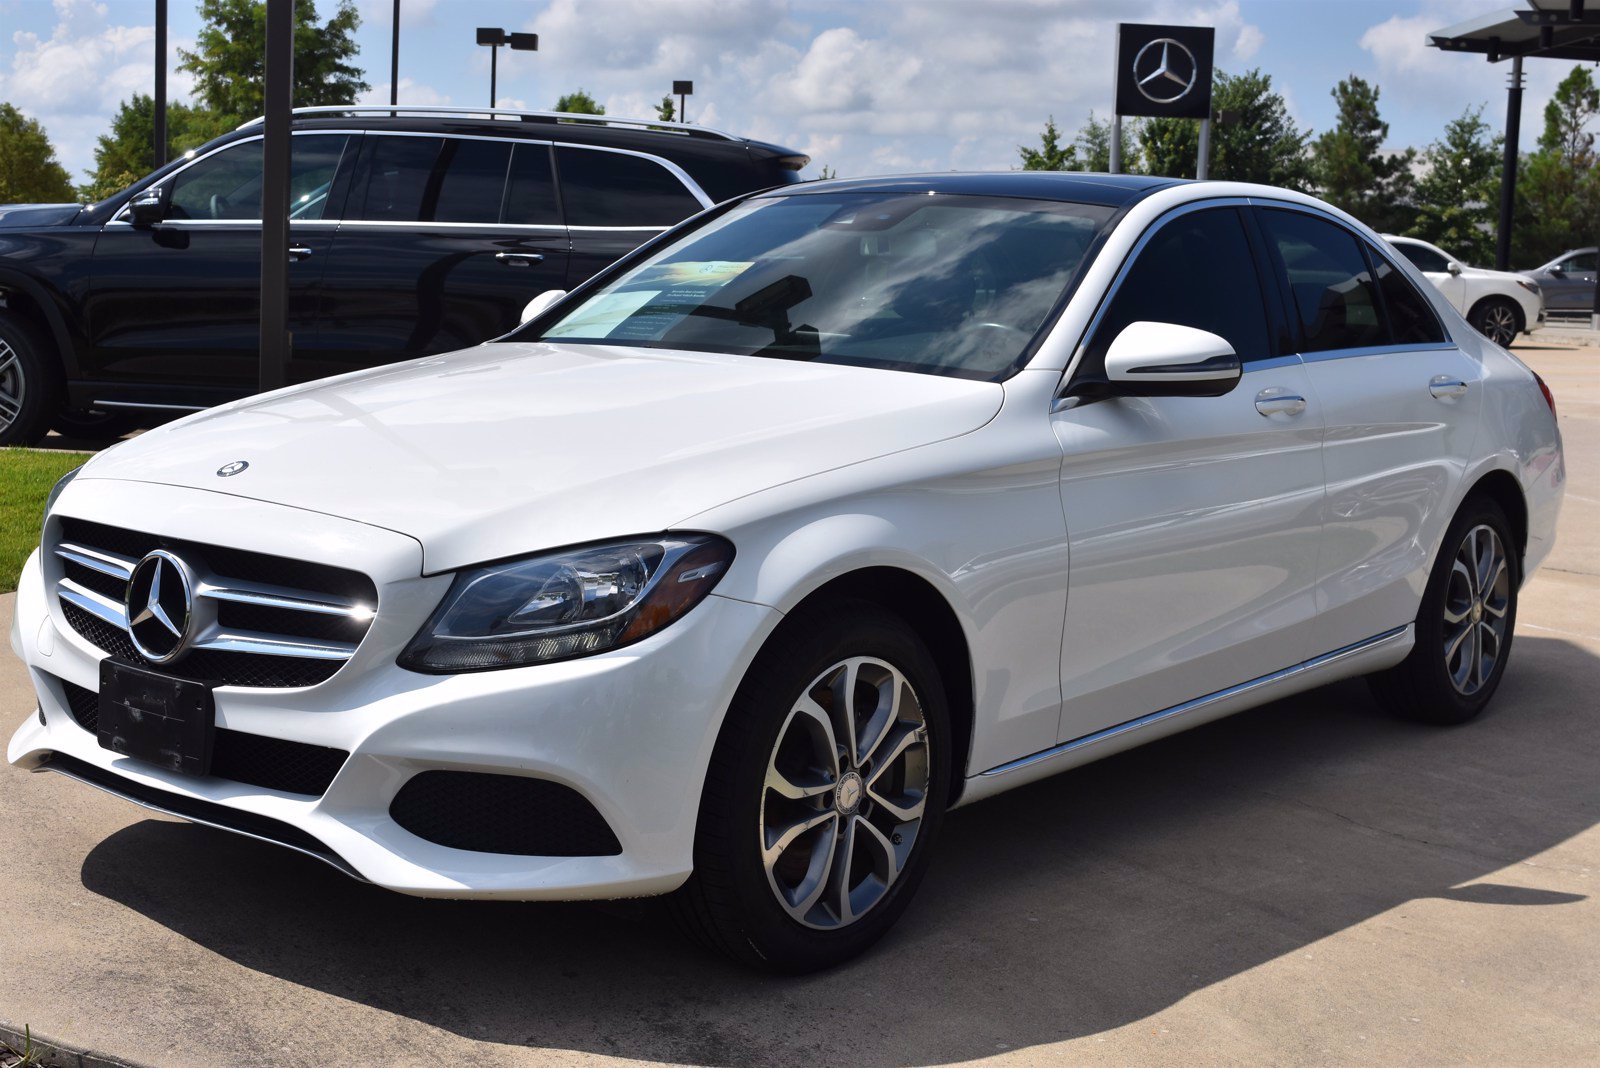 Certified PreOwned 2017 MercedesBenz CClass C 300 4Matic 4dr Car in